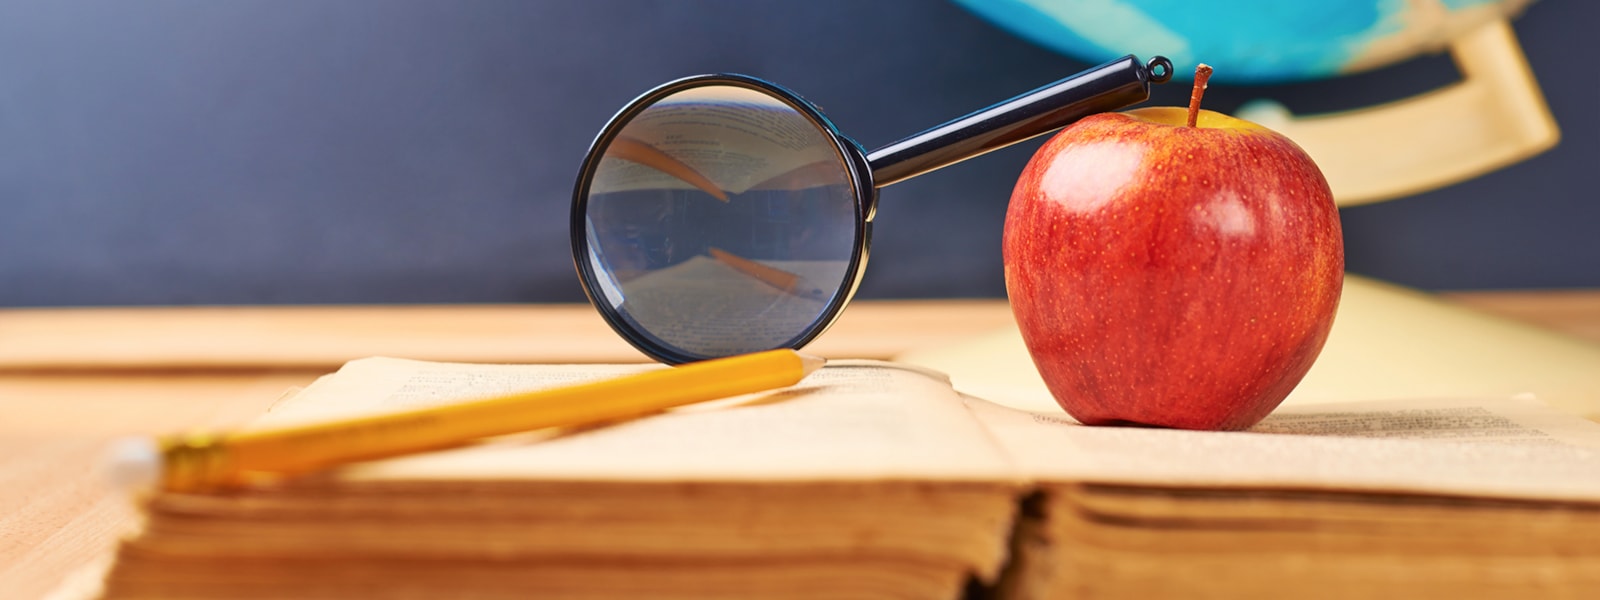 An apple, a pencil and magnifying glass on top of a book.